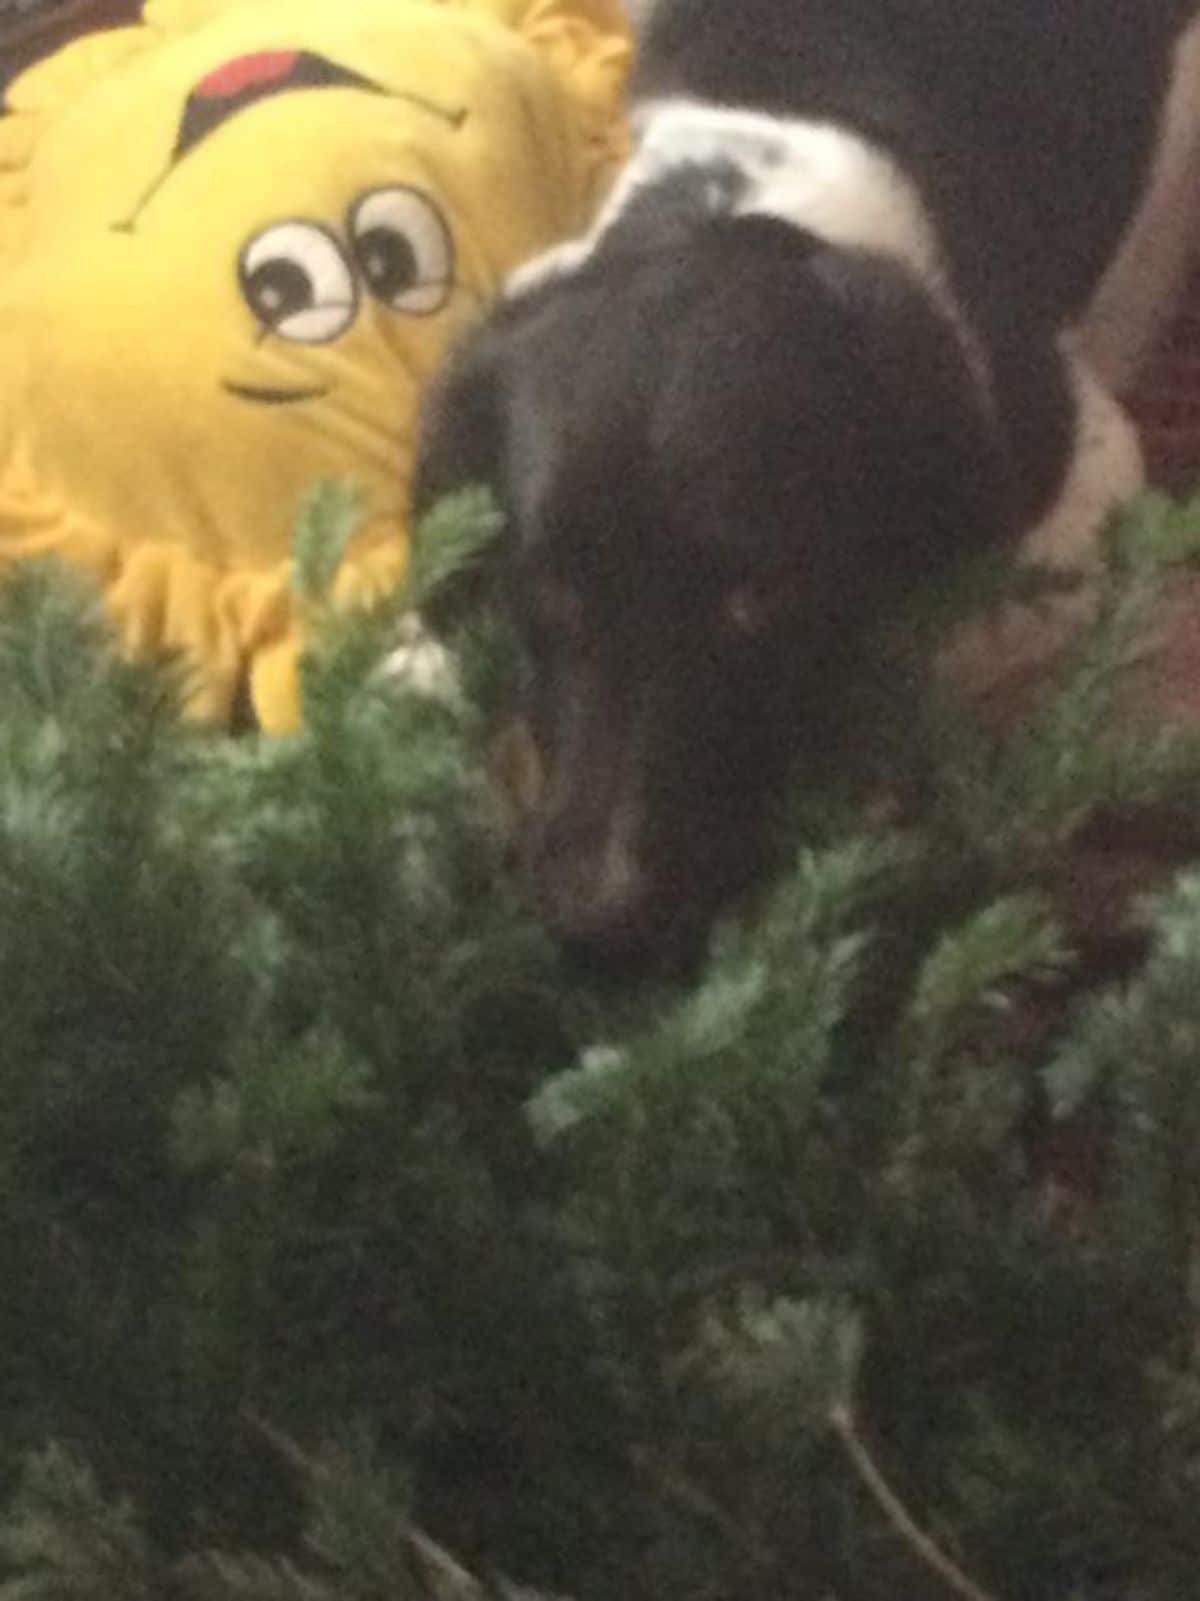 black and white dog standing next to a christmas tree toppled over next to a yellow sun stuffed toy